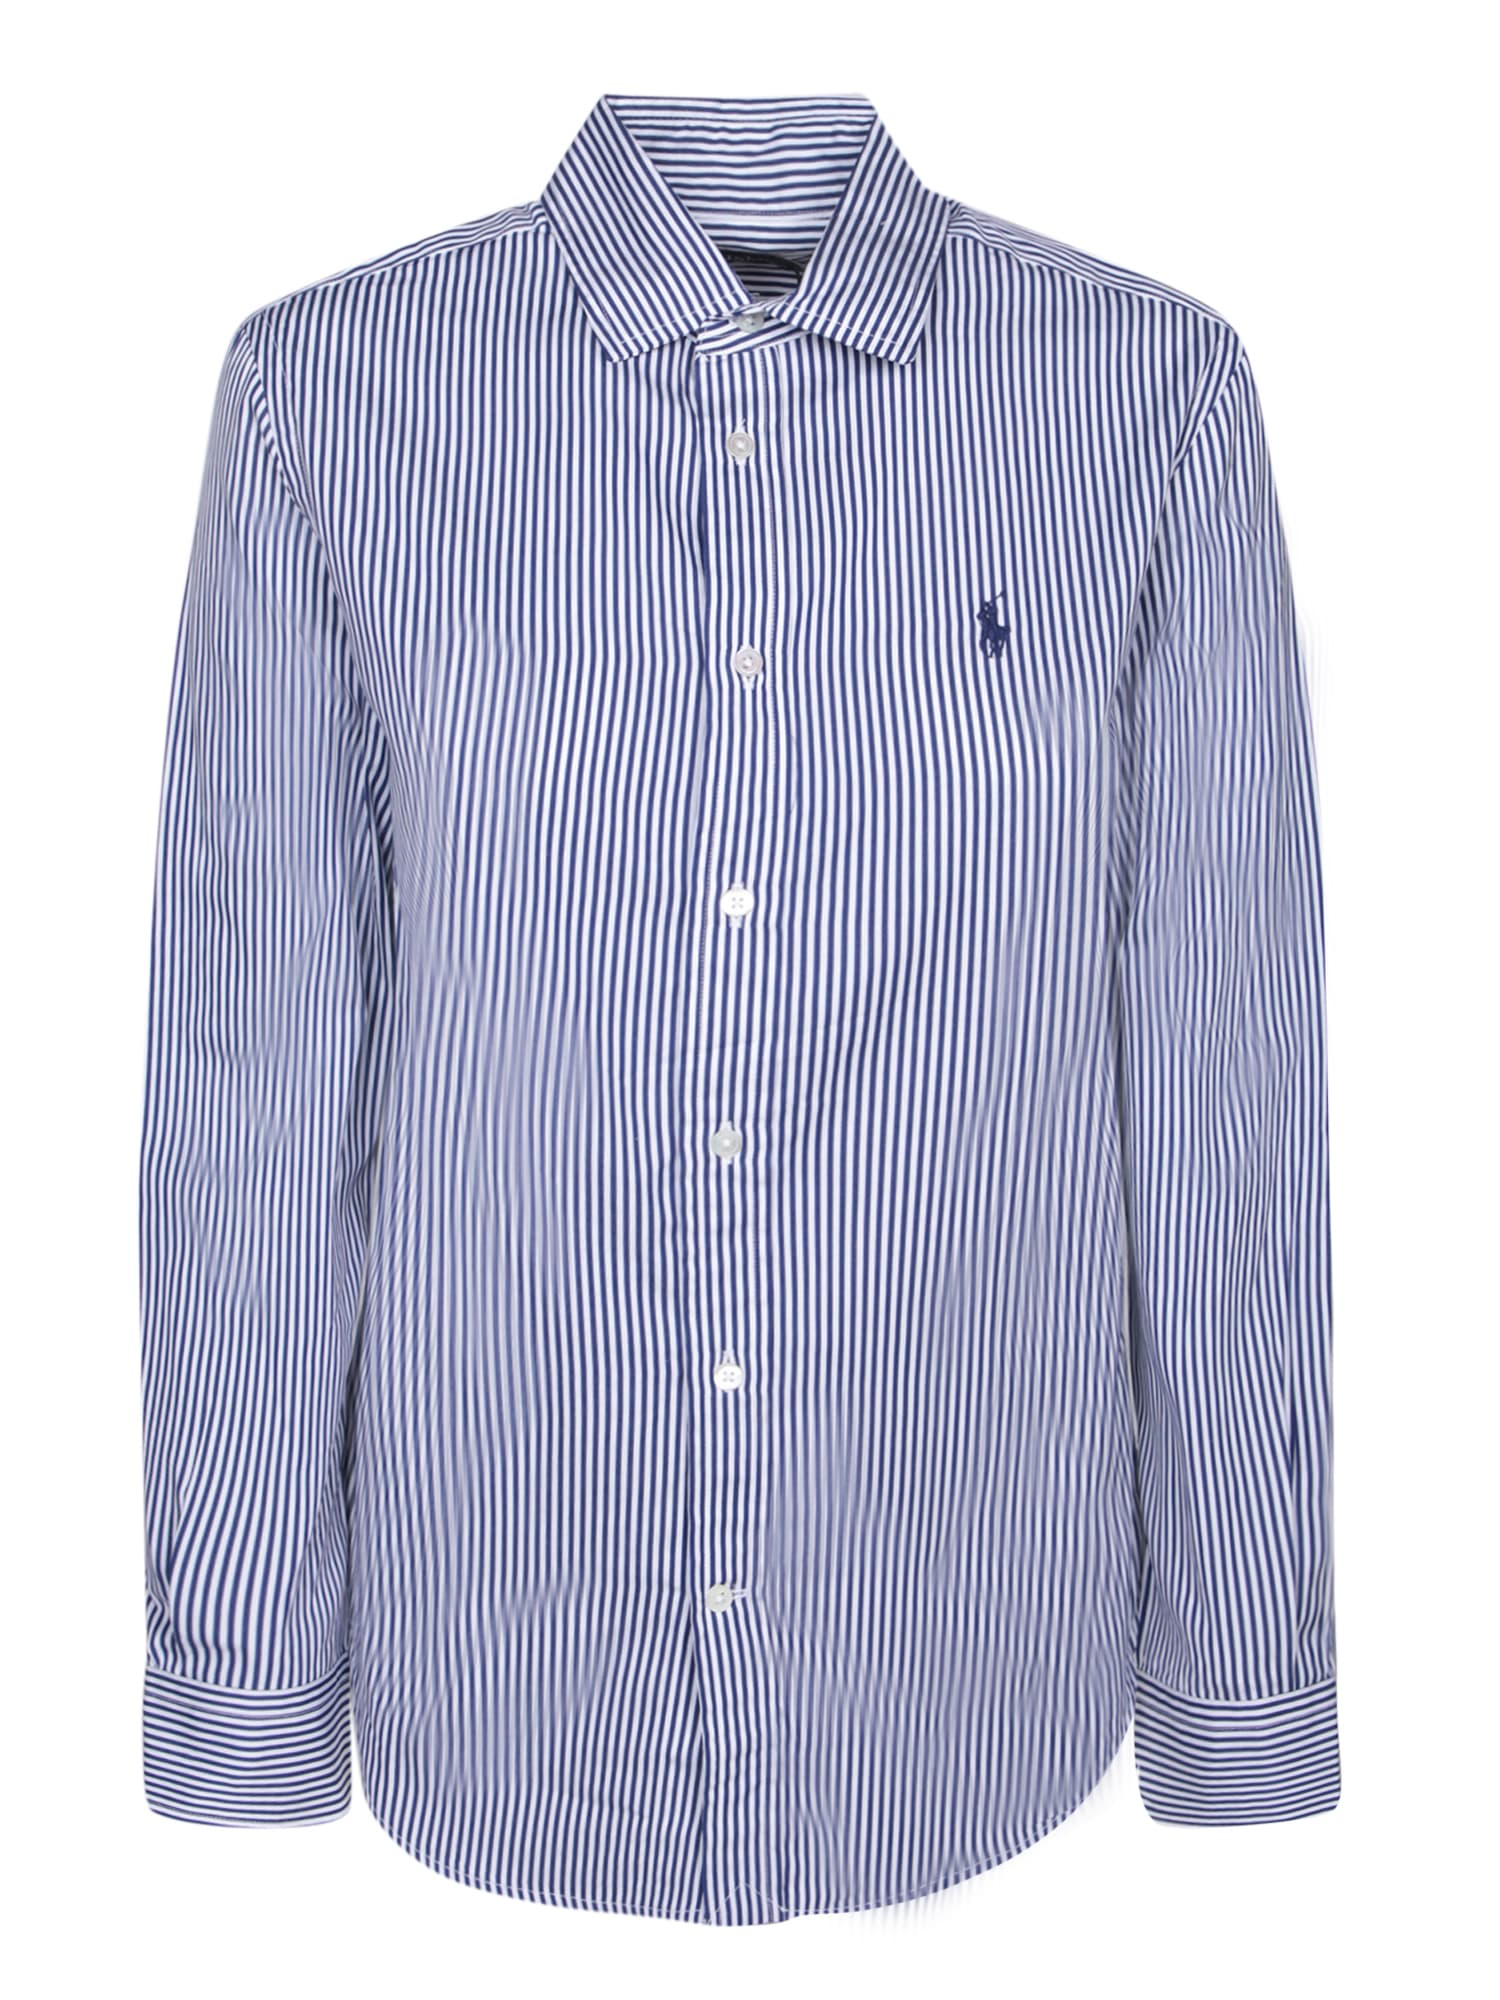 Blue And White Striped Cotton Shirt